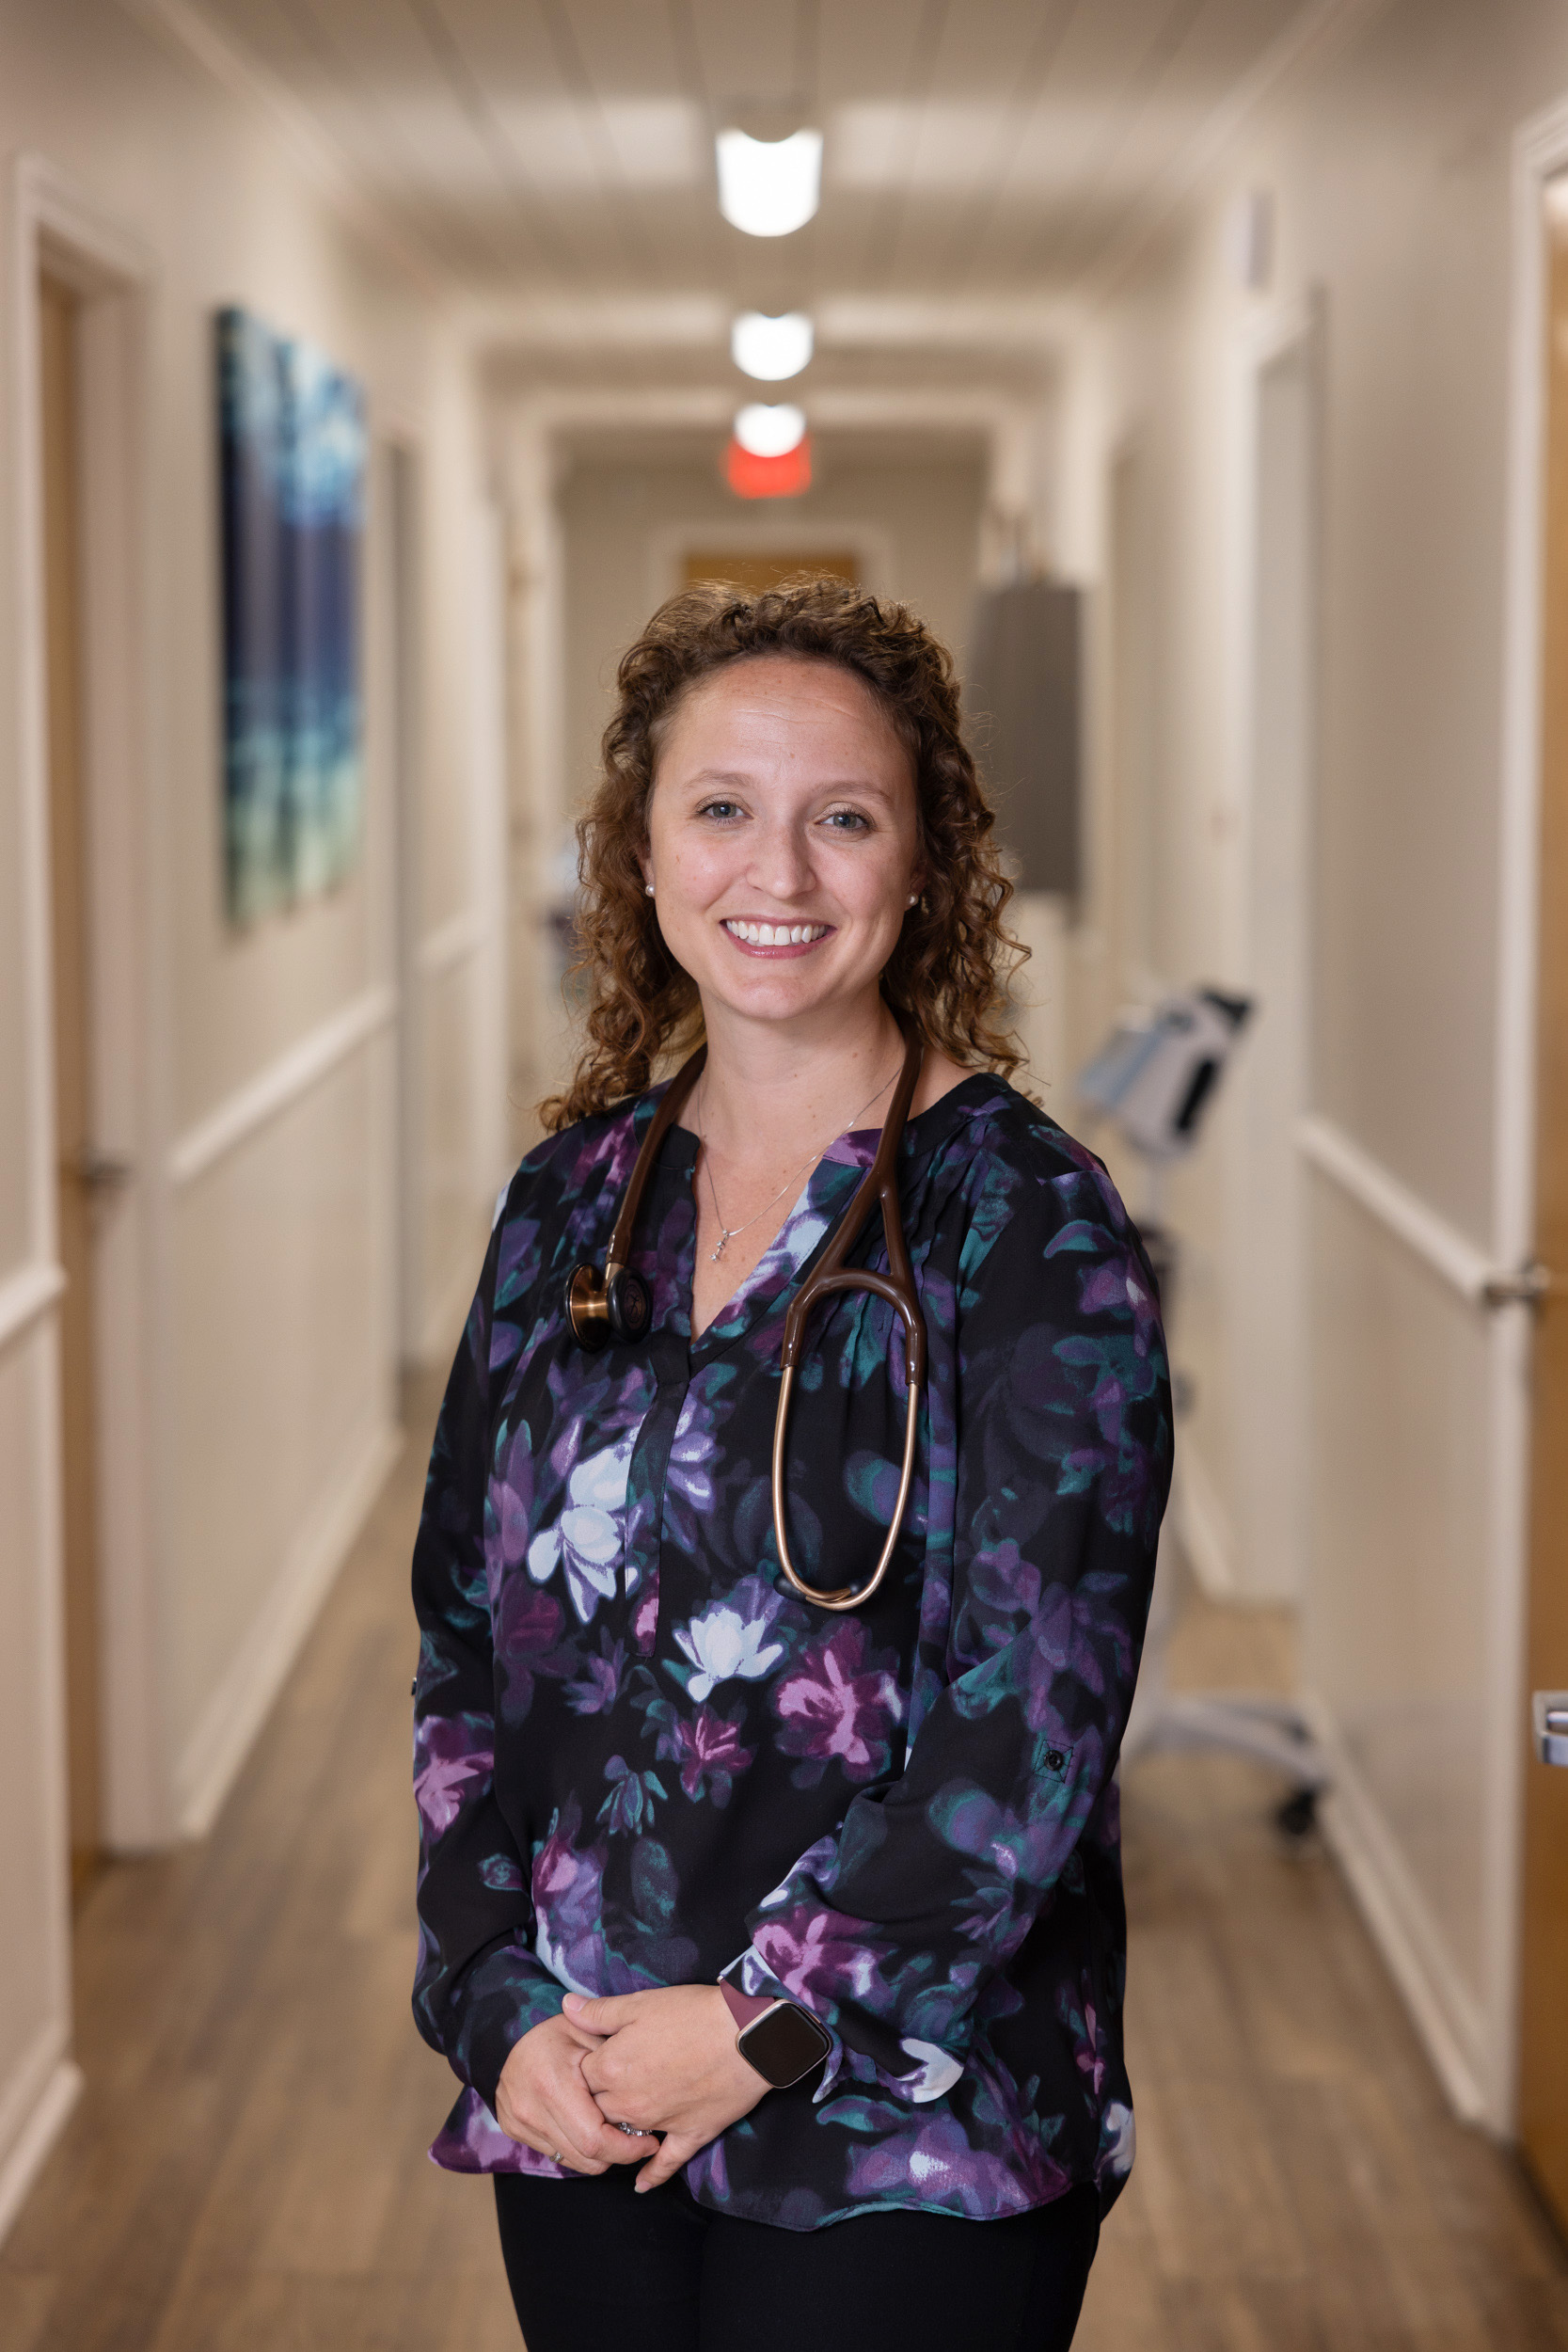 Allison Hindt will help you at Batish Family Medicine.